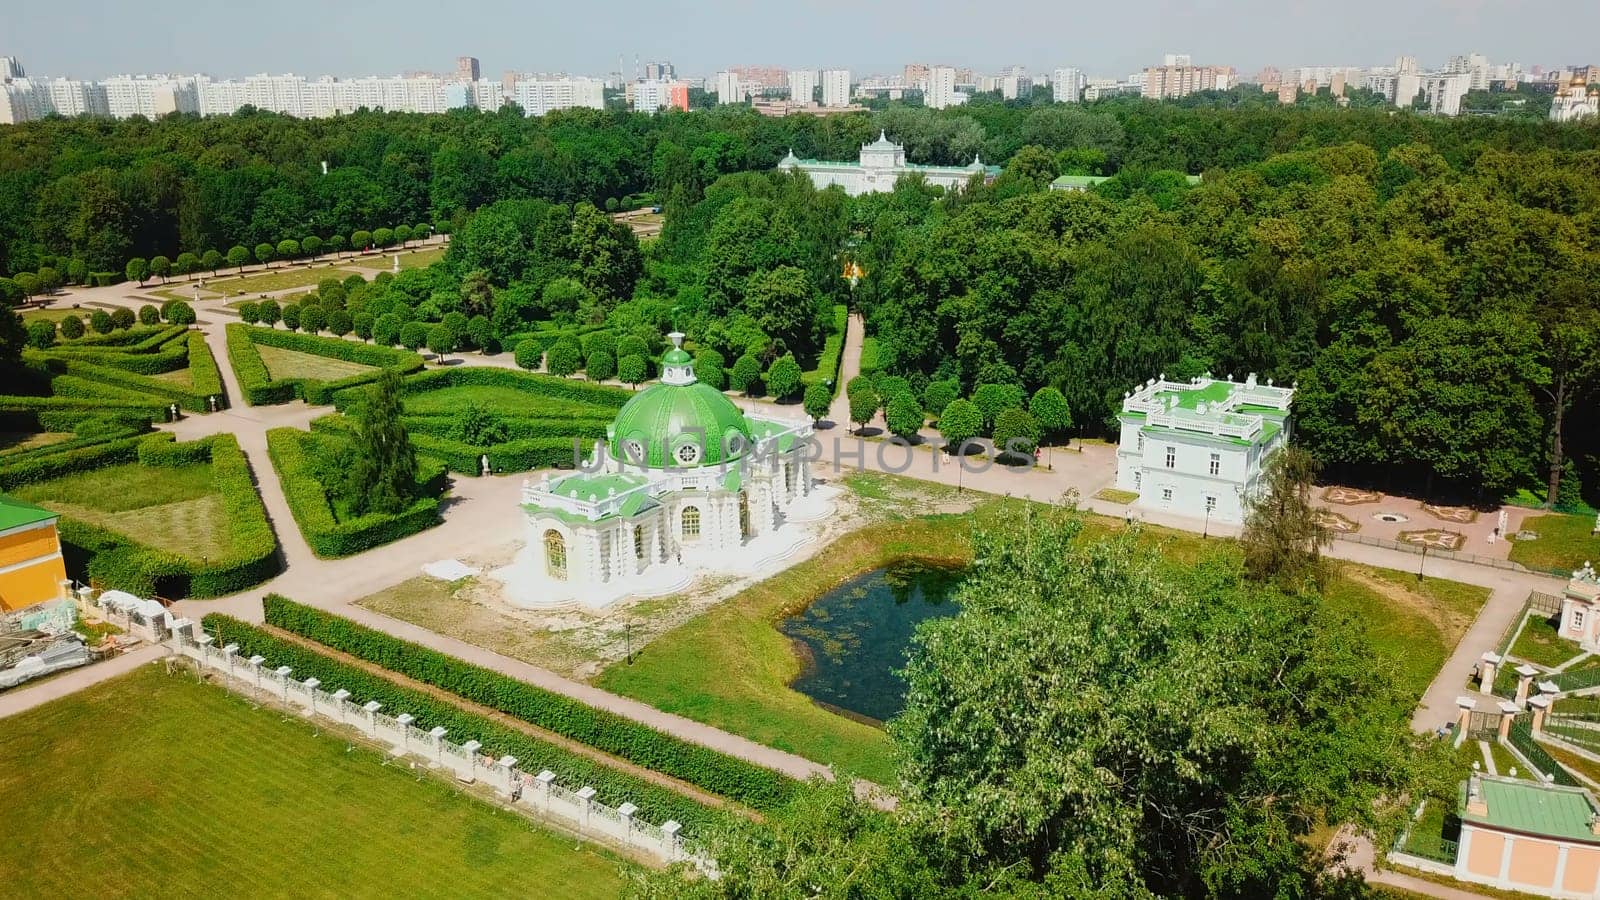 Top view of palace complex with park and pond. Creative. Landscape of palace grounds with park and pond. Beautiful summer park with green landscapes and palace buildings by Mediawhalestock